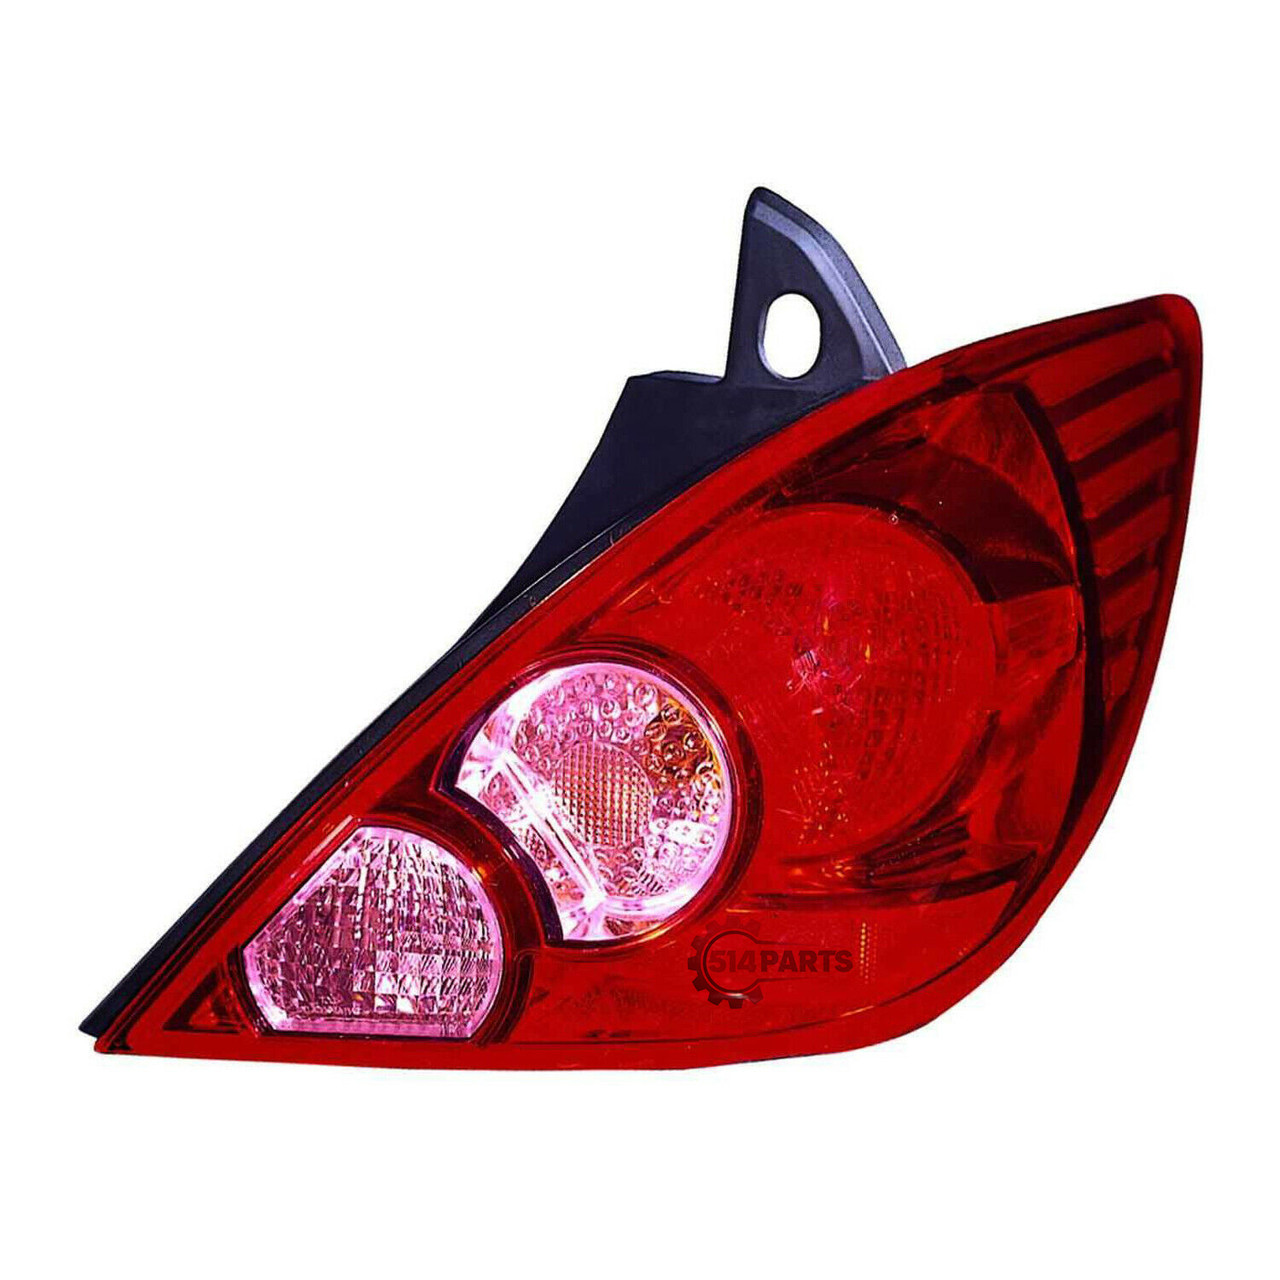 2007 - 2012 NISSAN VERSA Hatchback TAIL LIGHTS High Quality - PHARES ARRIERE Haute Qualite